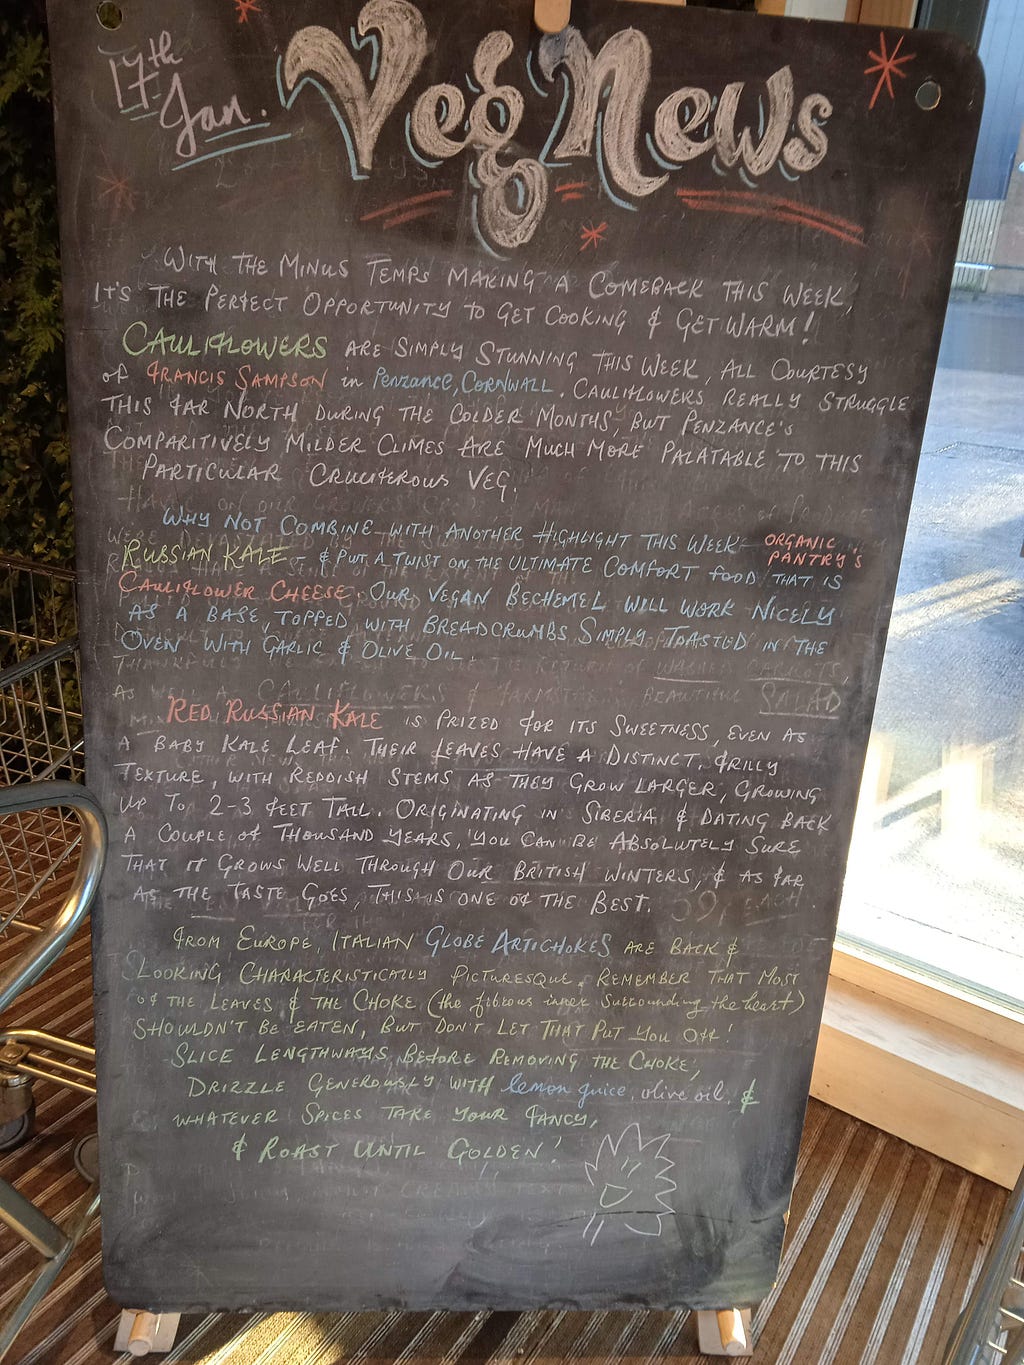 A chalk board outside Unicorn Grocery, Manchester, UK. The heading is “veg news”, followed by several paragraphs detailing the latest seasonal updates.